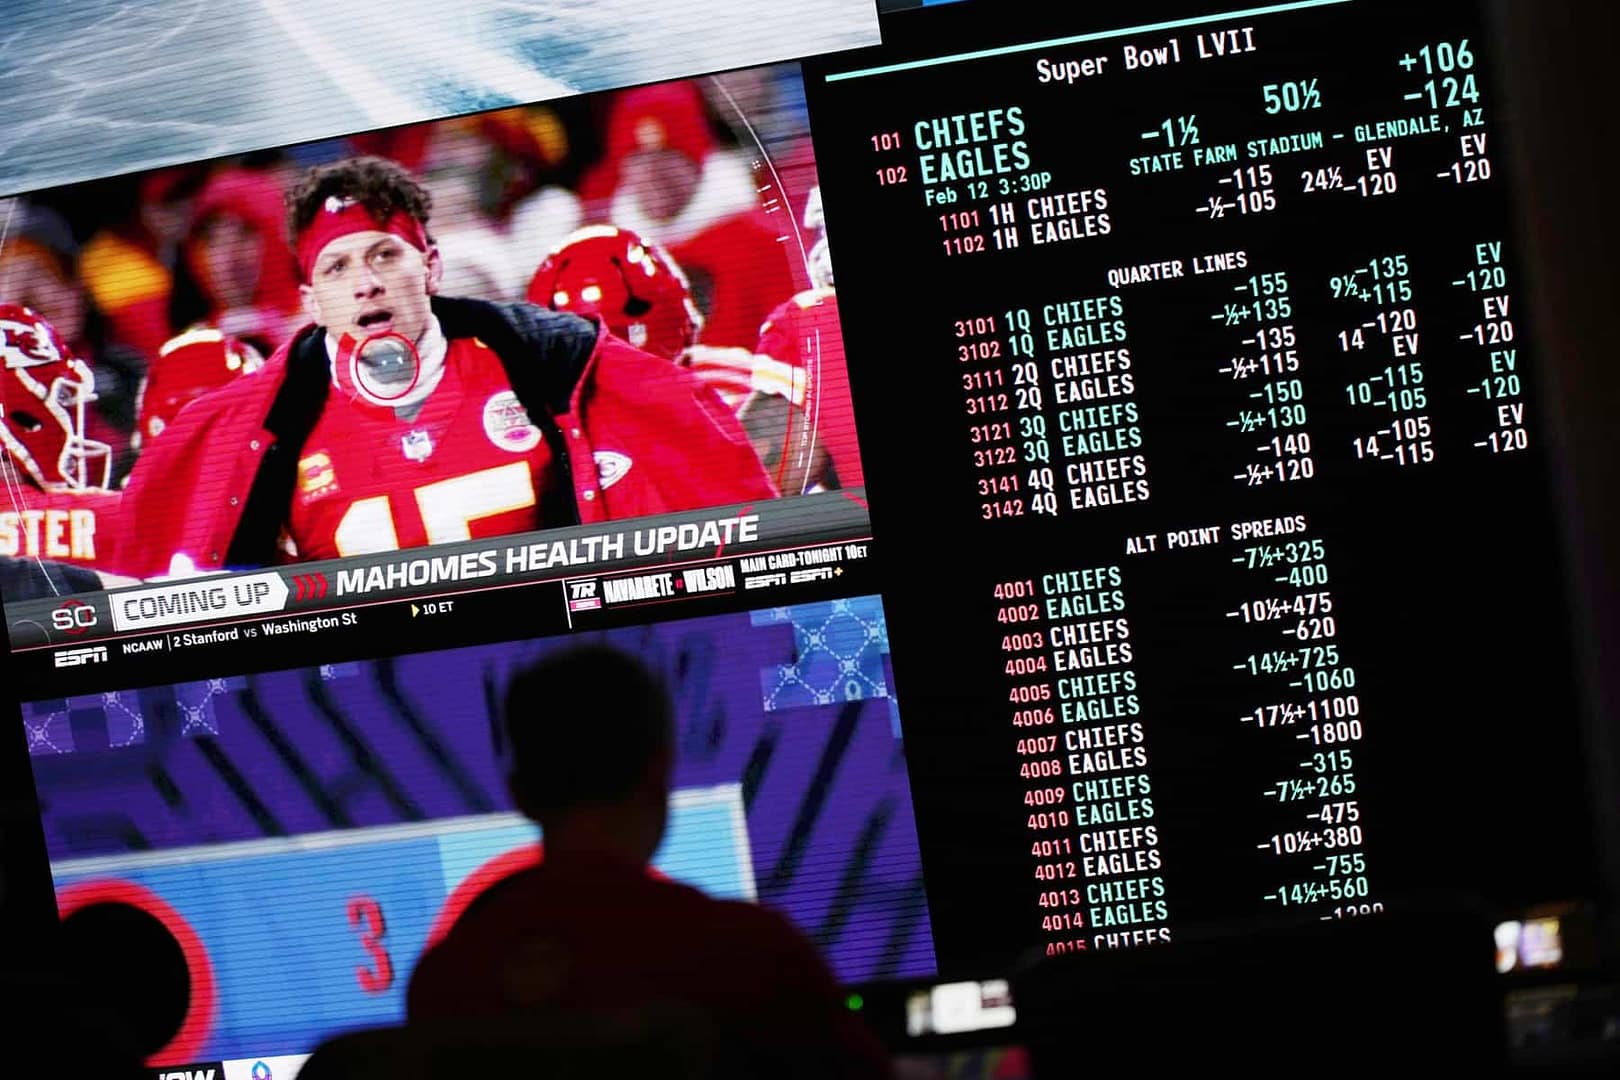 In this strategy guide to NFL and college football betting, our expert dives into the key offensive stats to know when handicapping...